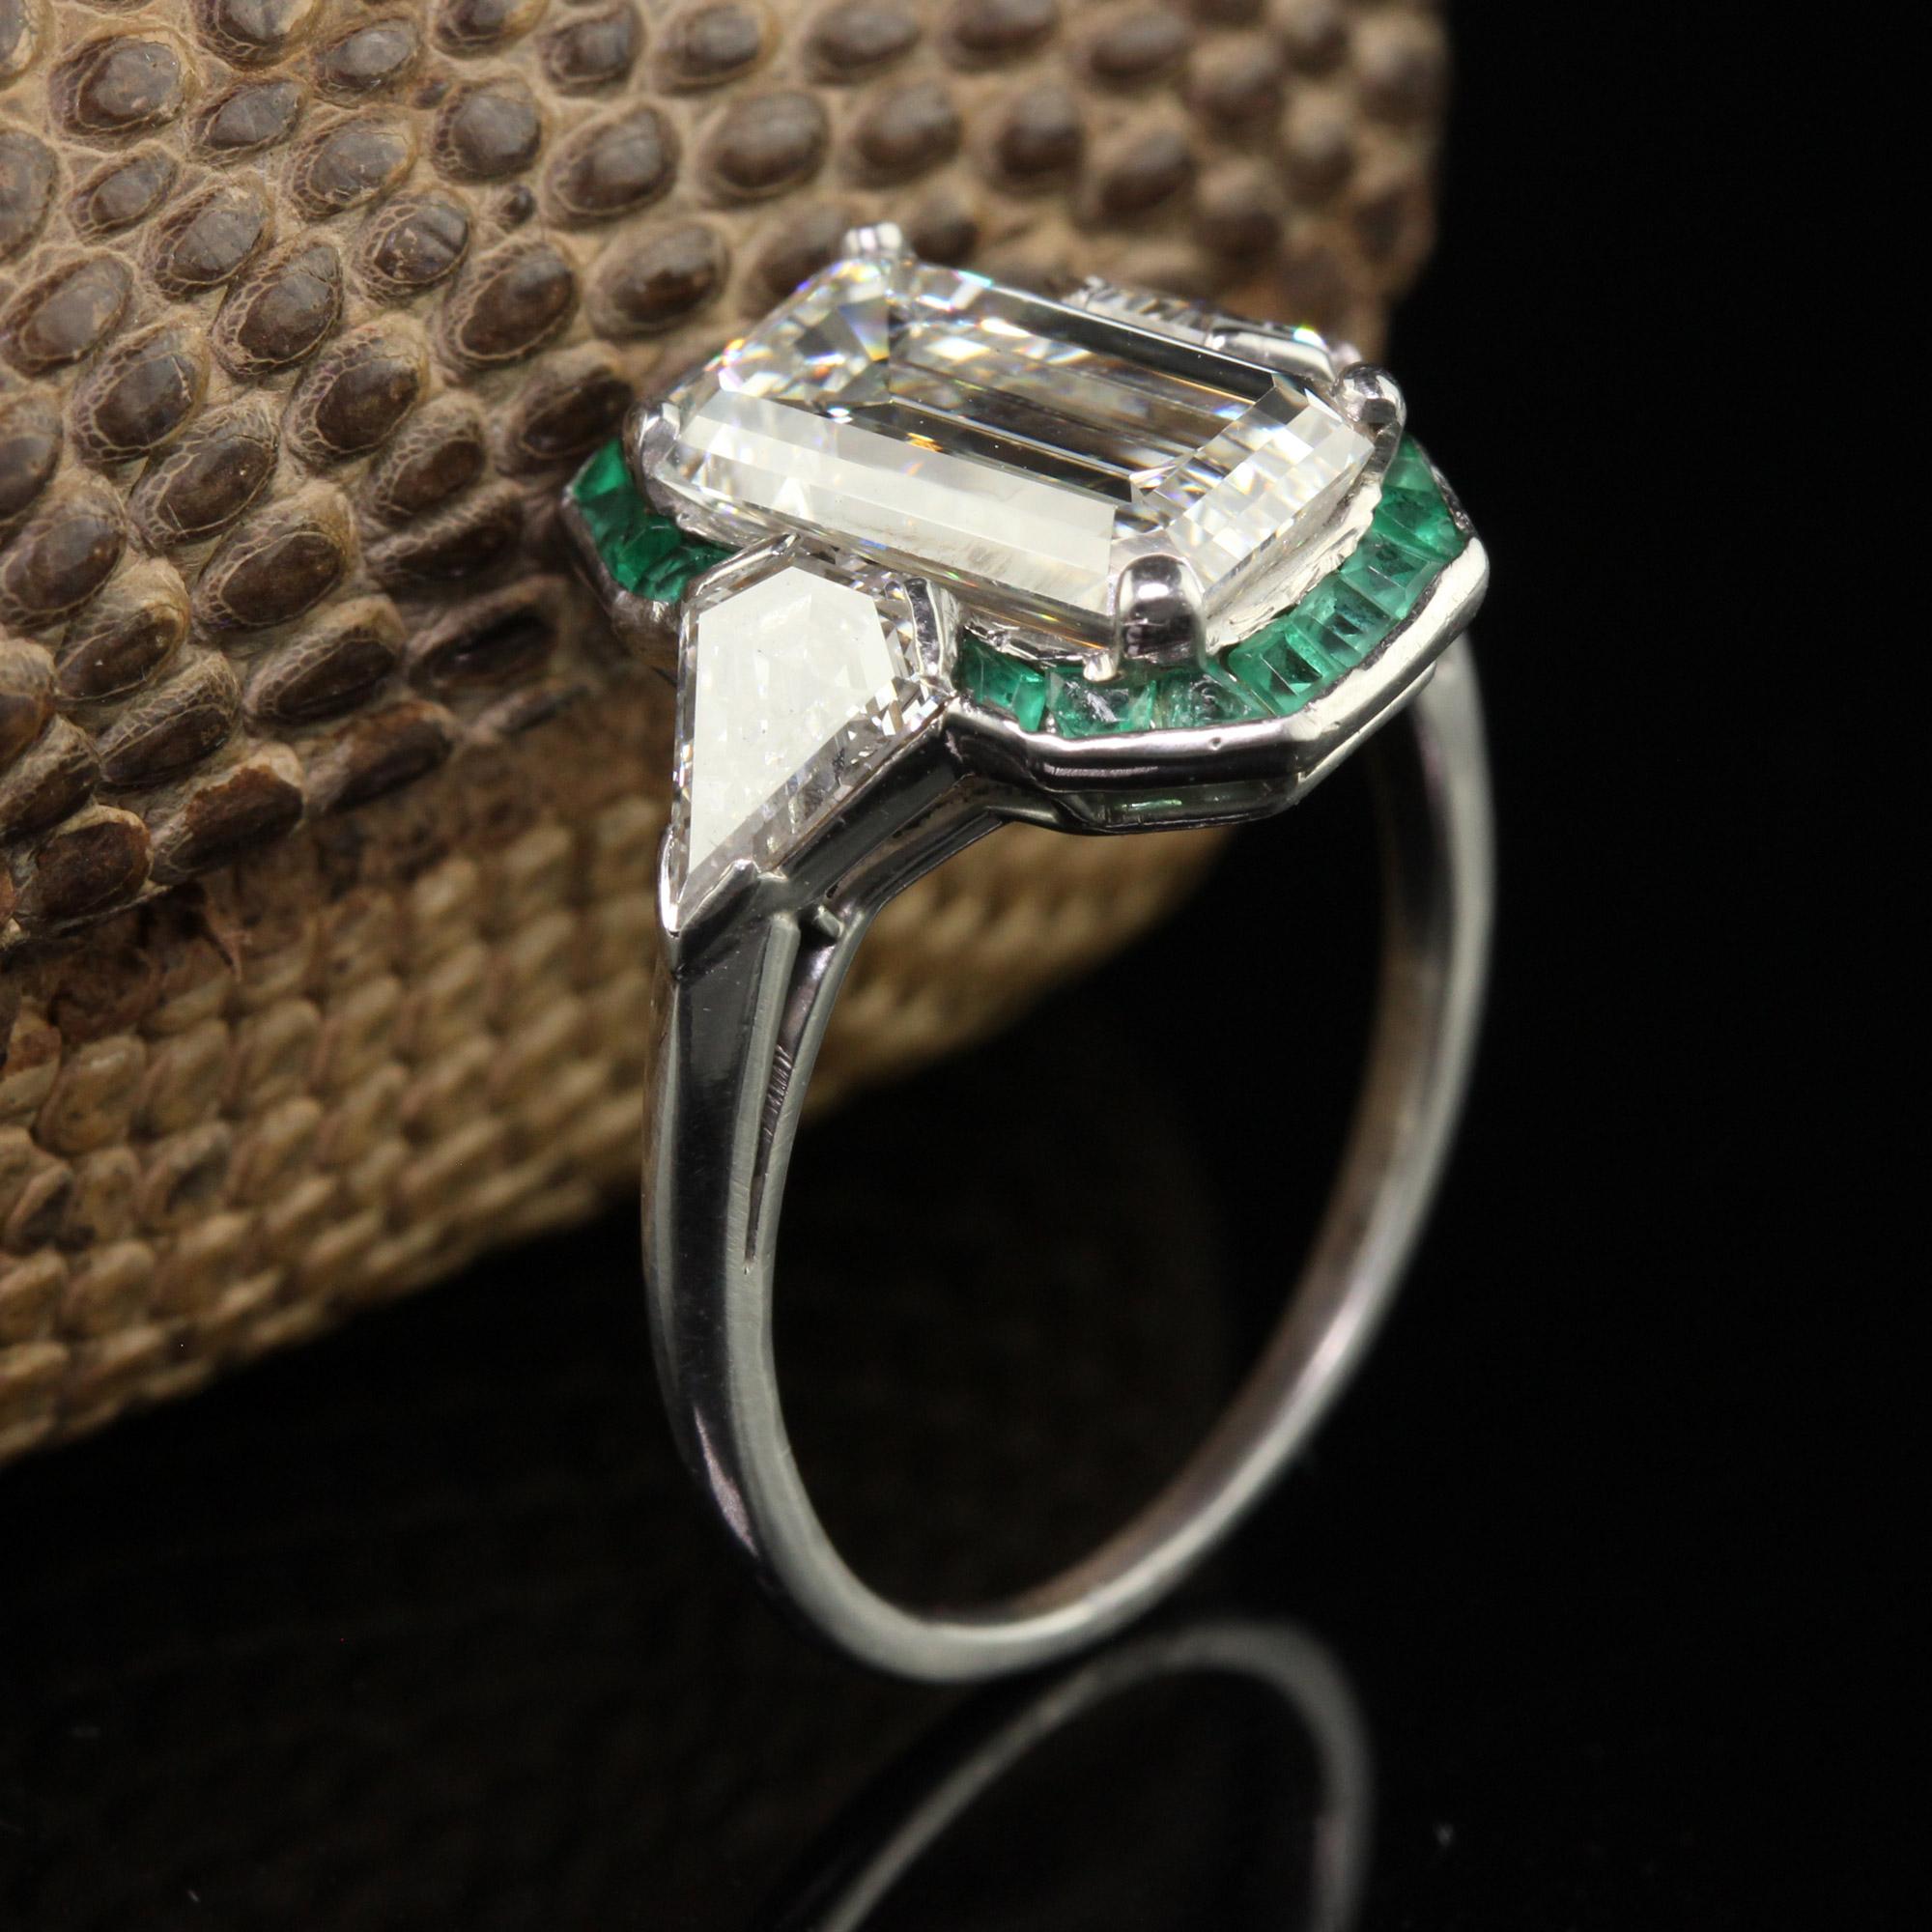 1920s style rings